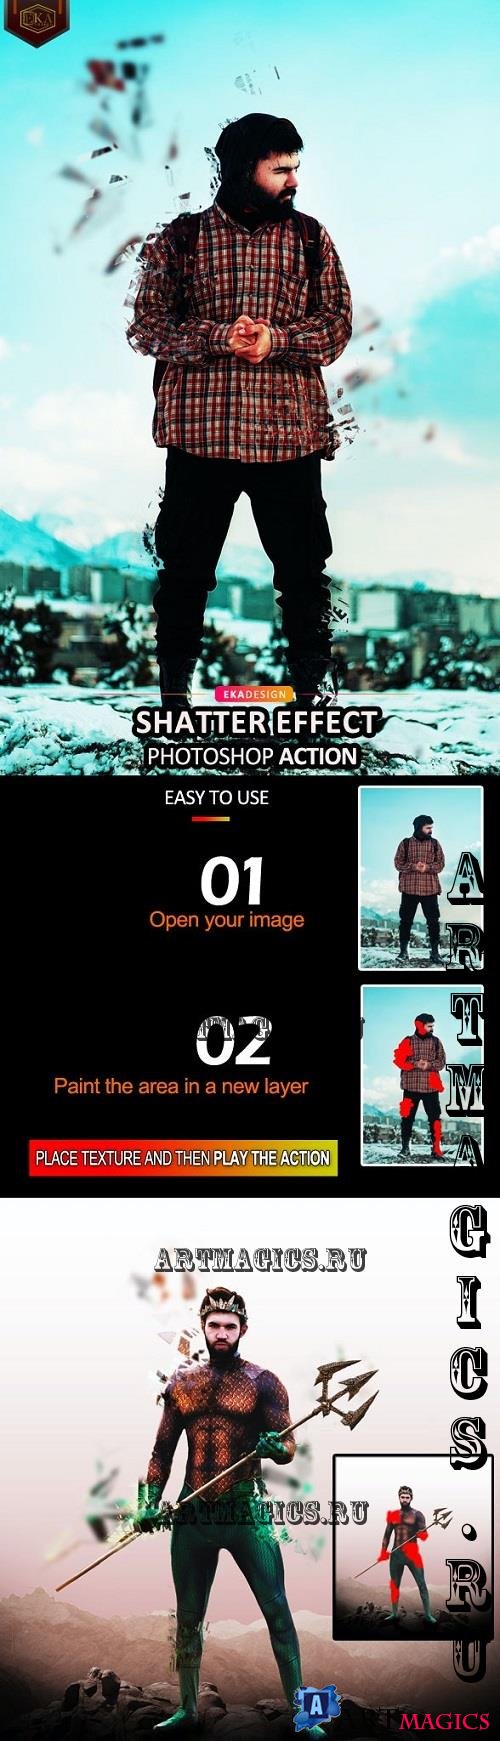 Shatter Effect Photoshop Action - 35276141 - 6790362